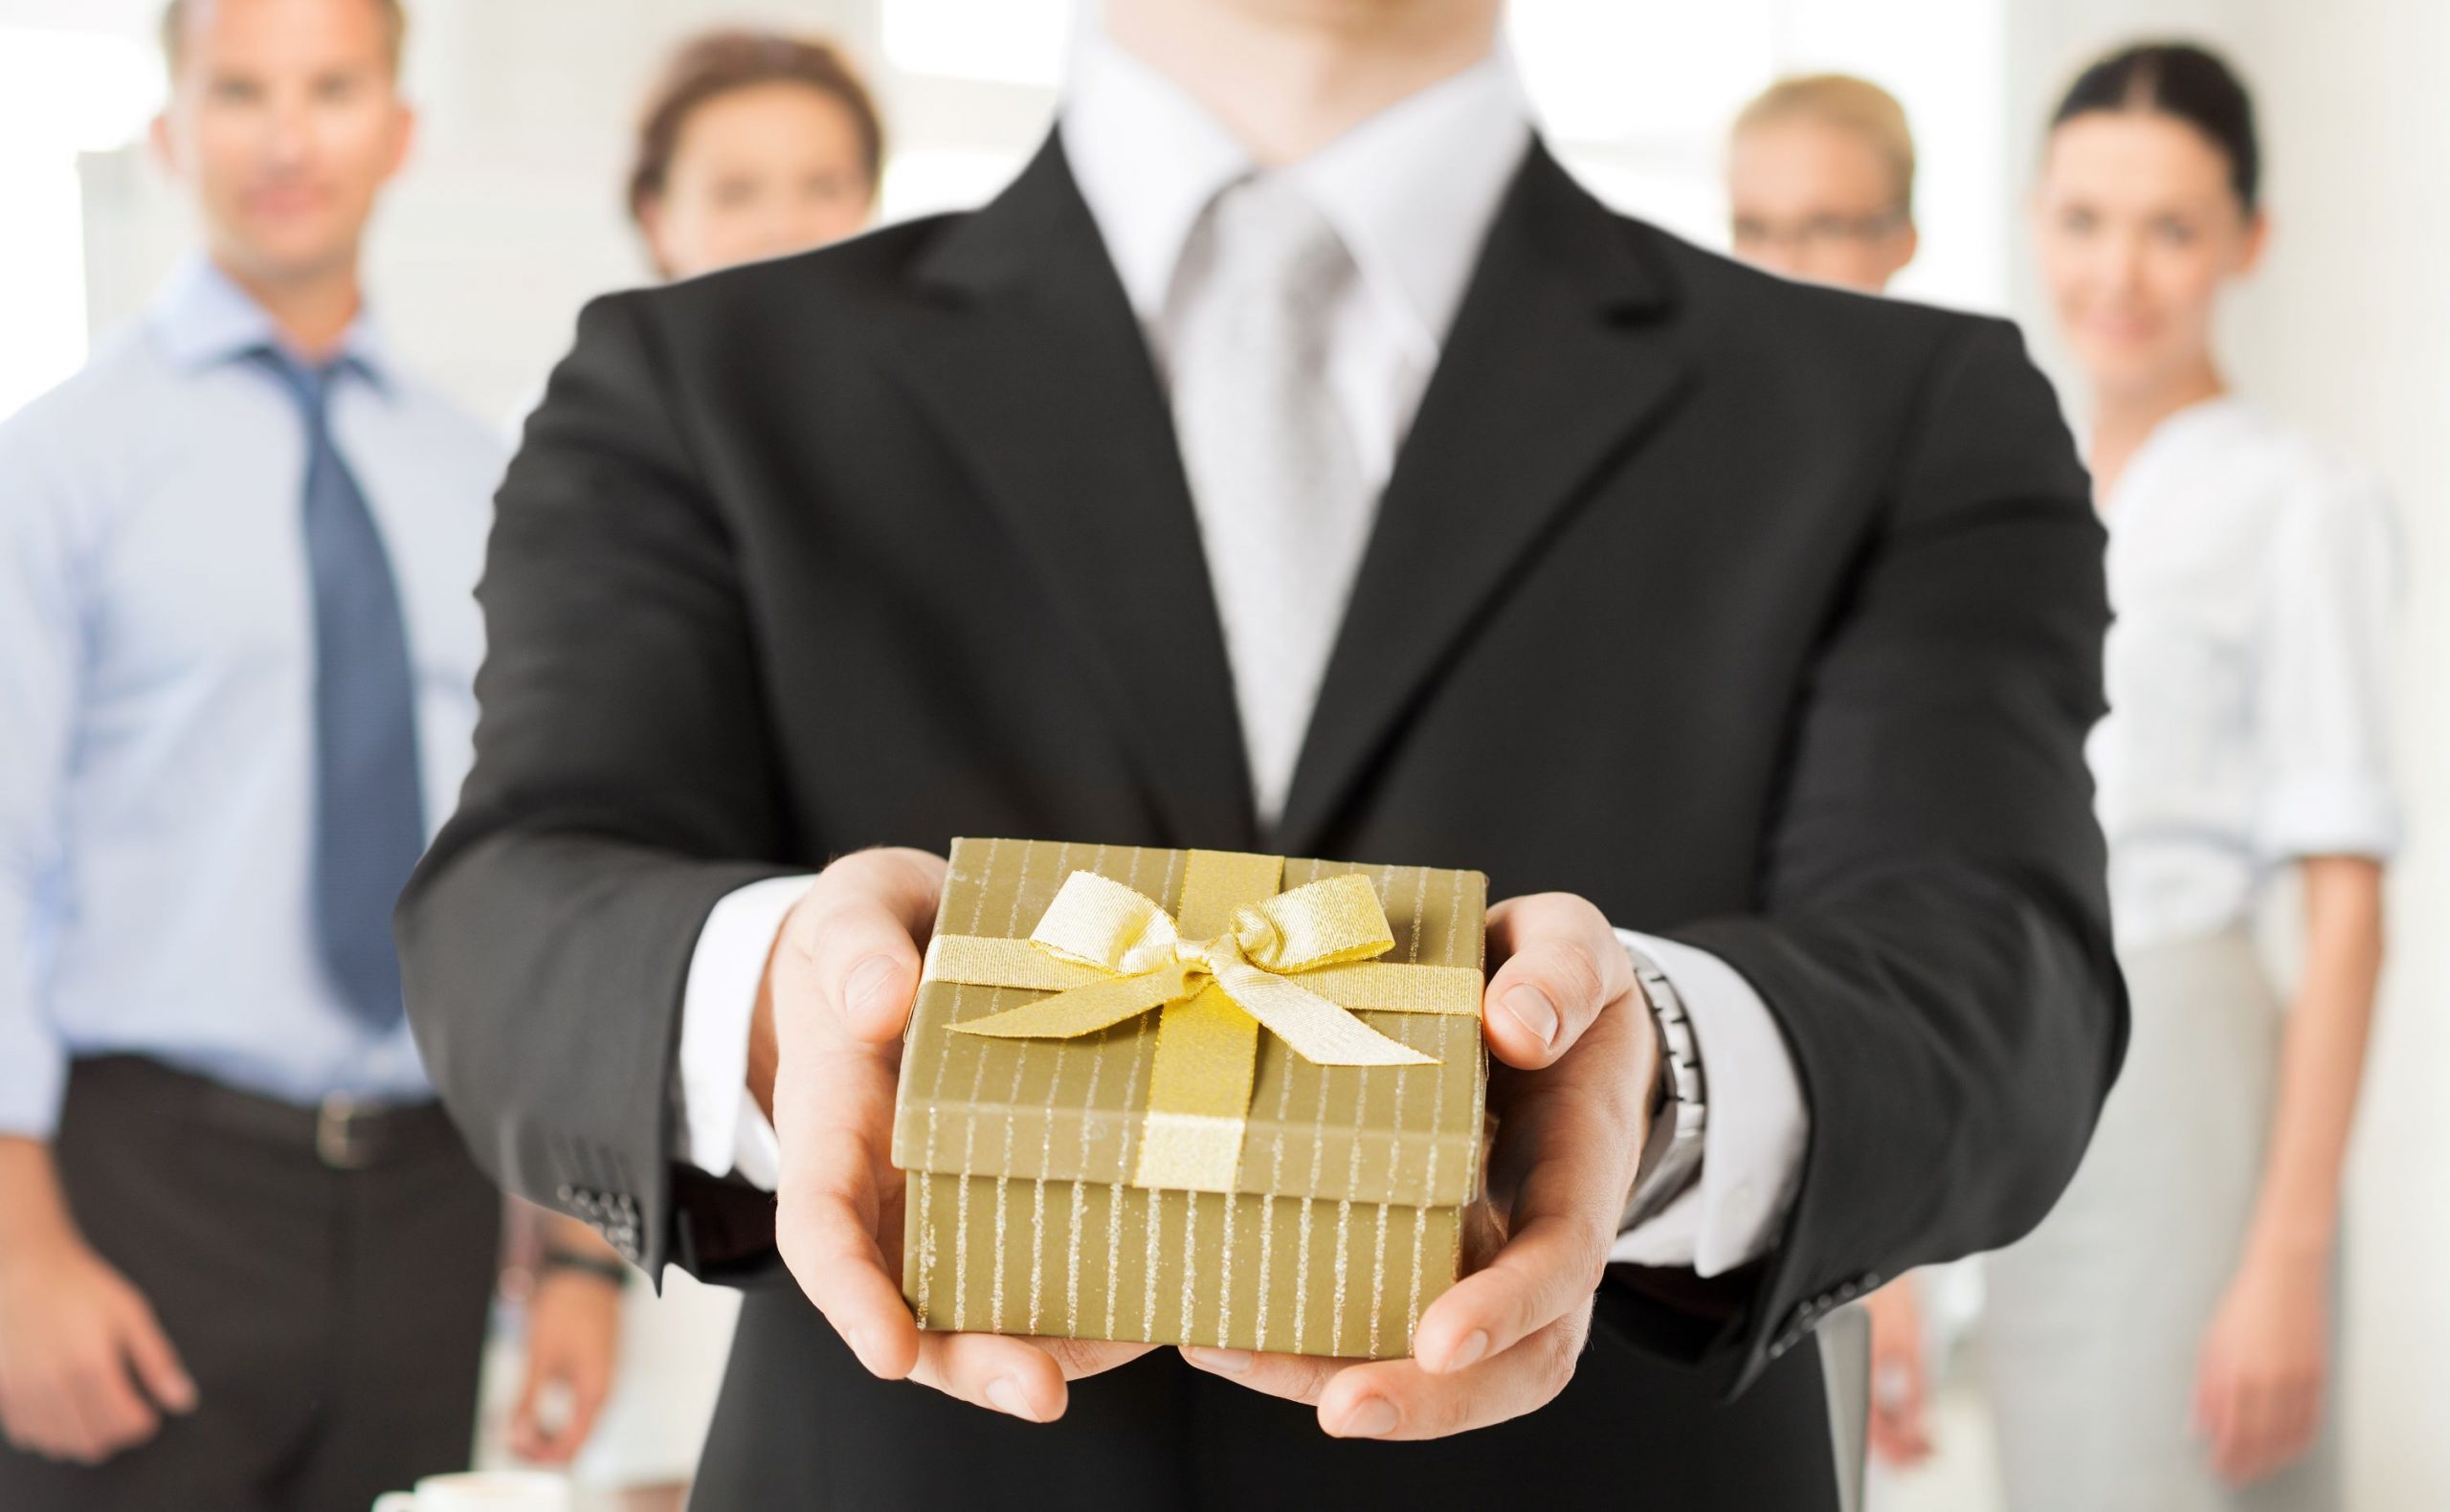 Corporate Gifts For Employees